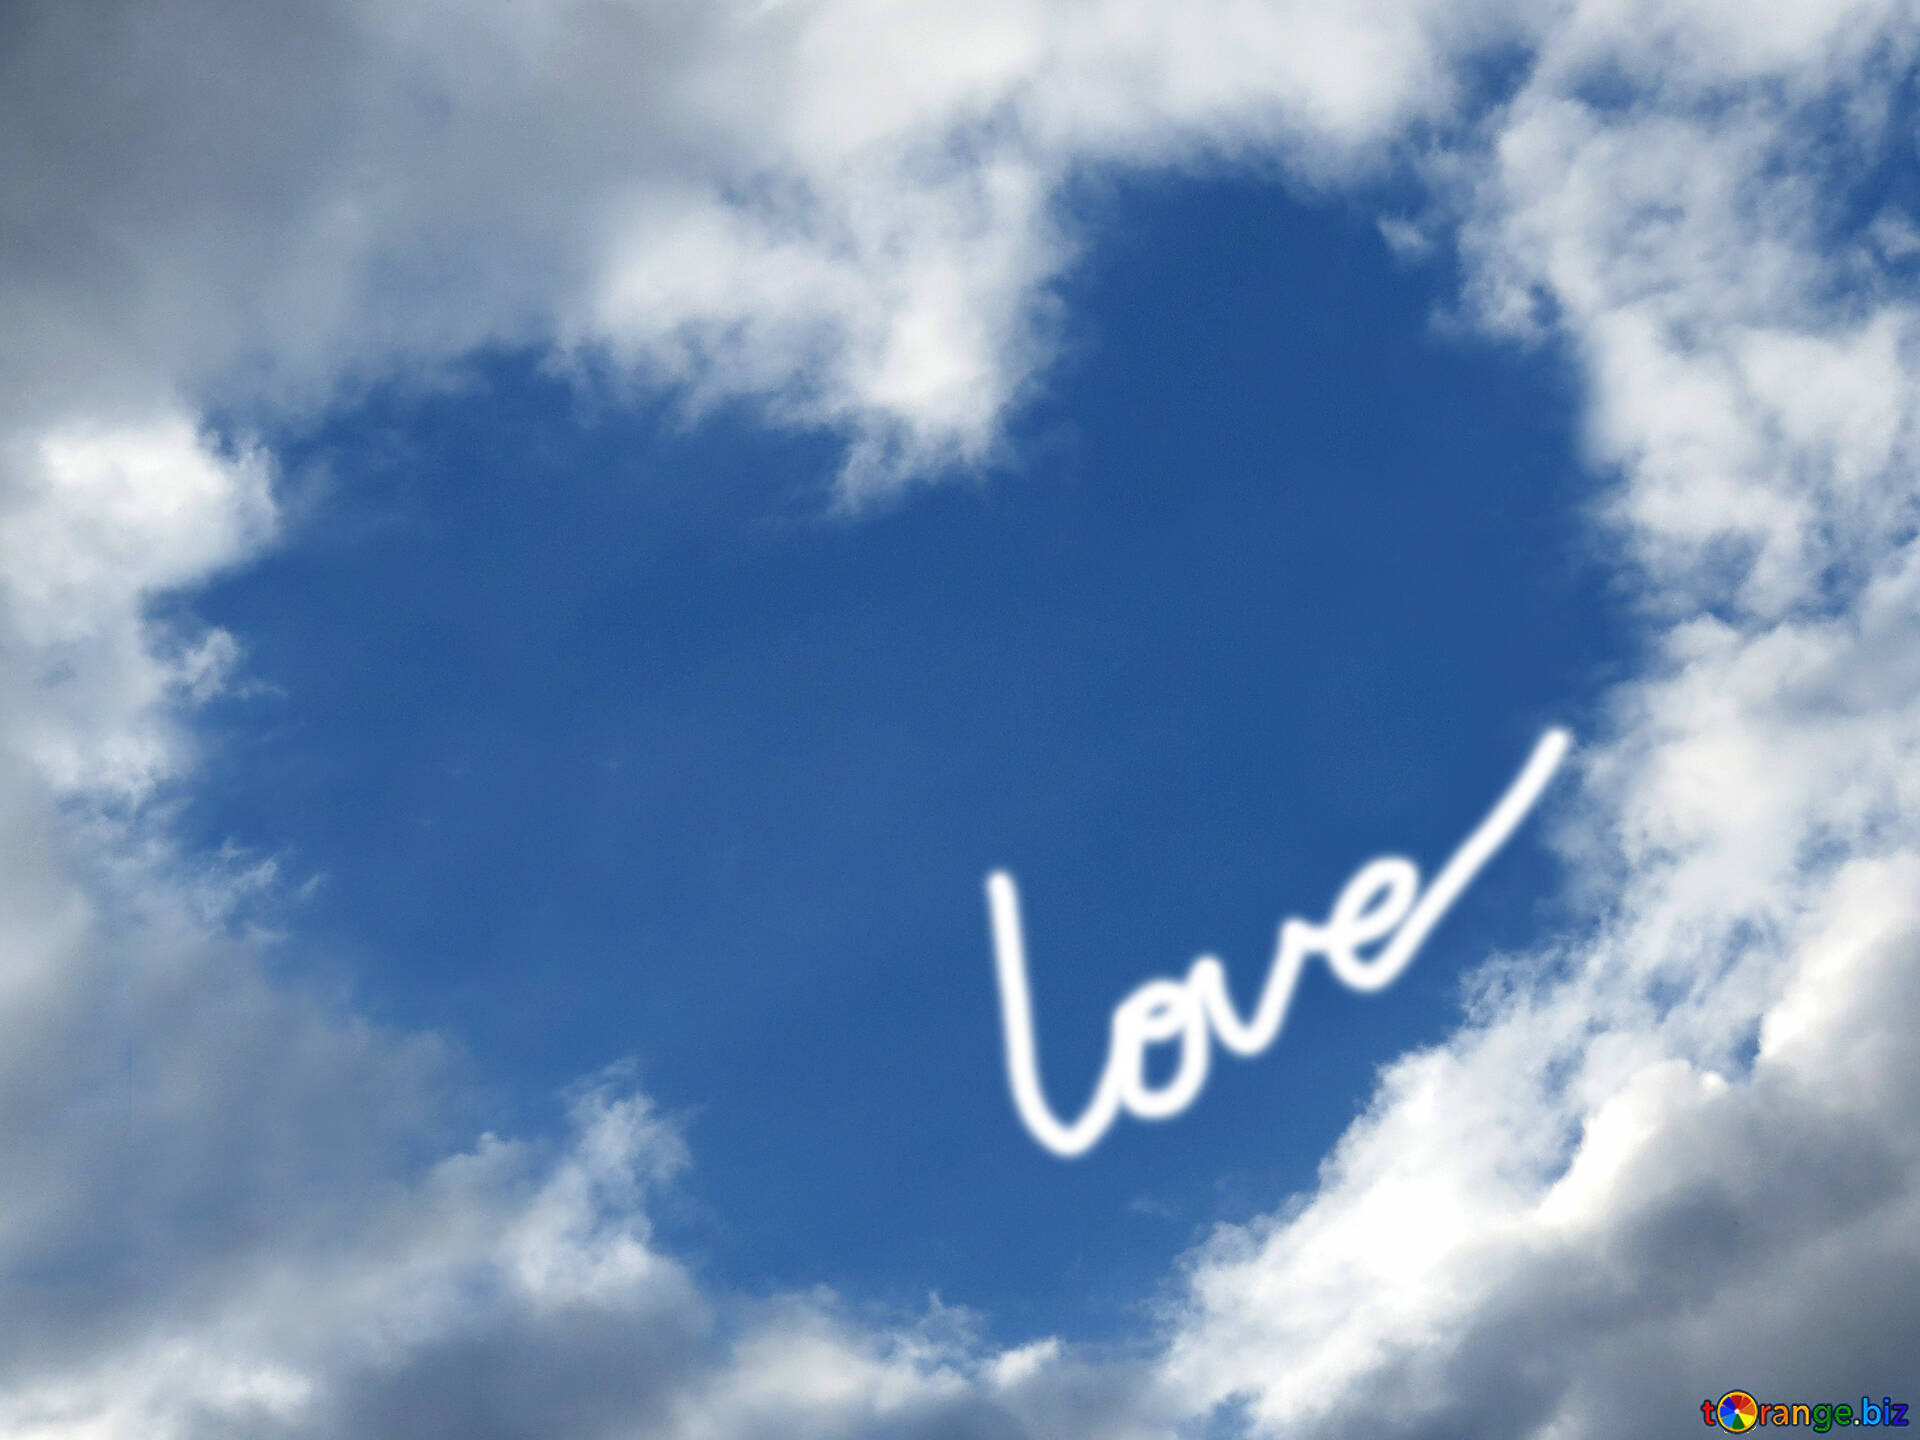 Backgrounds Hearts Image Background Love Heart Sky Images Heart Torange Biz Free Pics On Cc By License